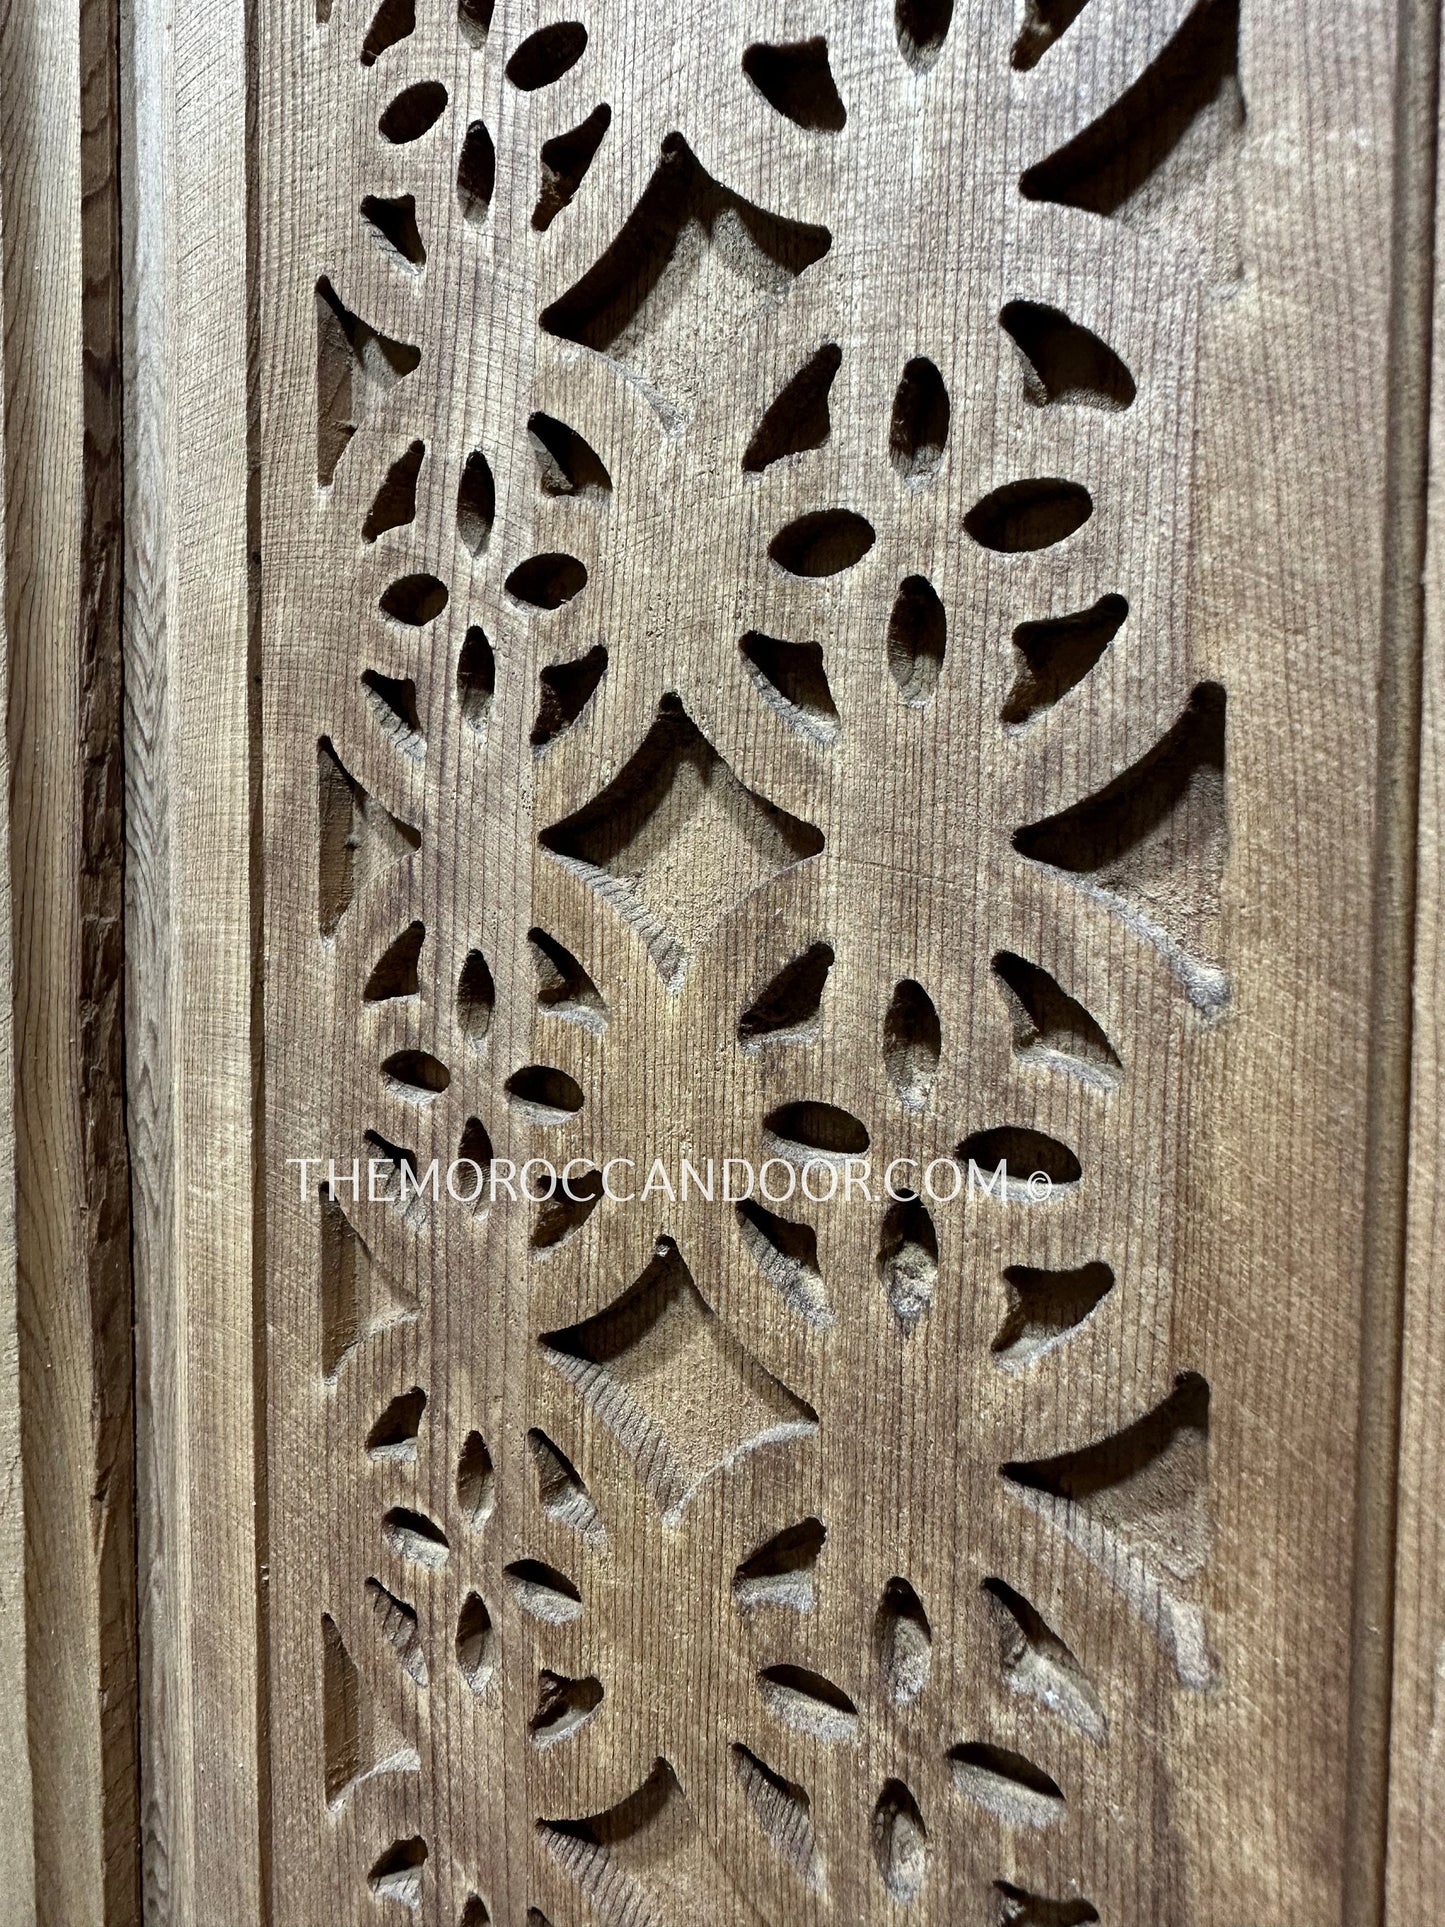 Exquisite Hand-carved Moroccan Door - Geometric Design - Authentic Riad Style - Authentic Moroccan Riad Door - Hand-carved Geometric Door